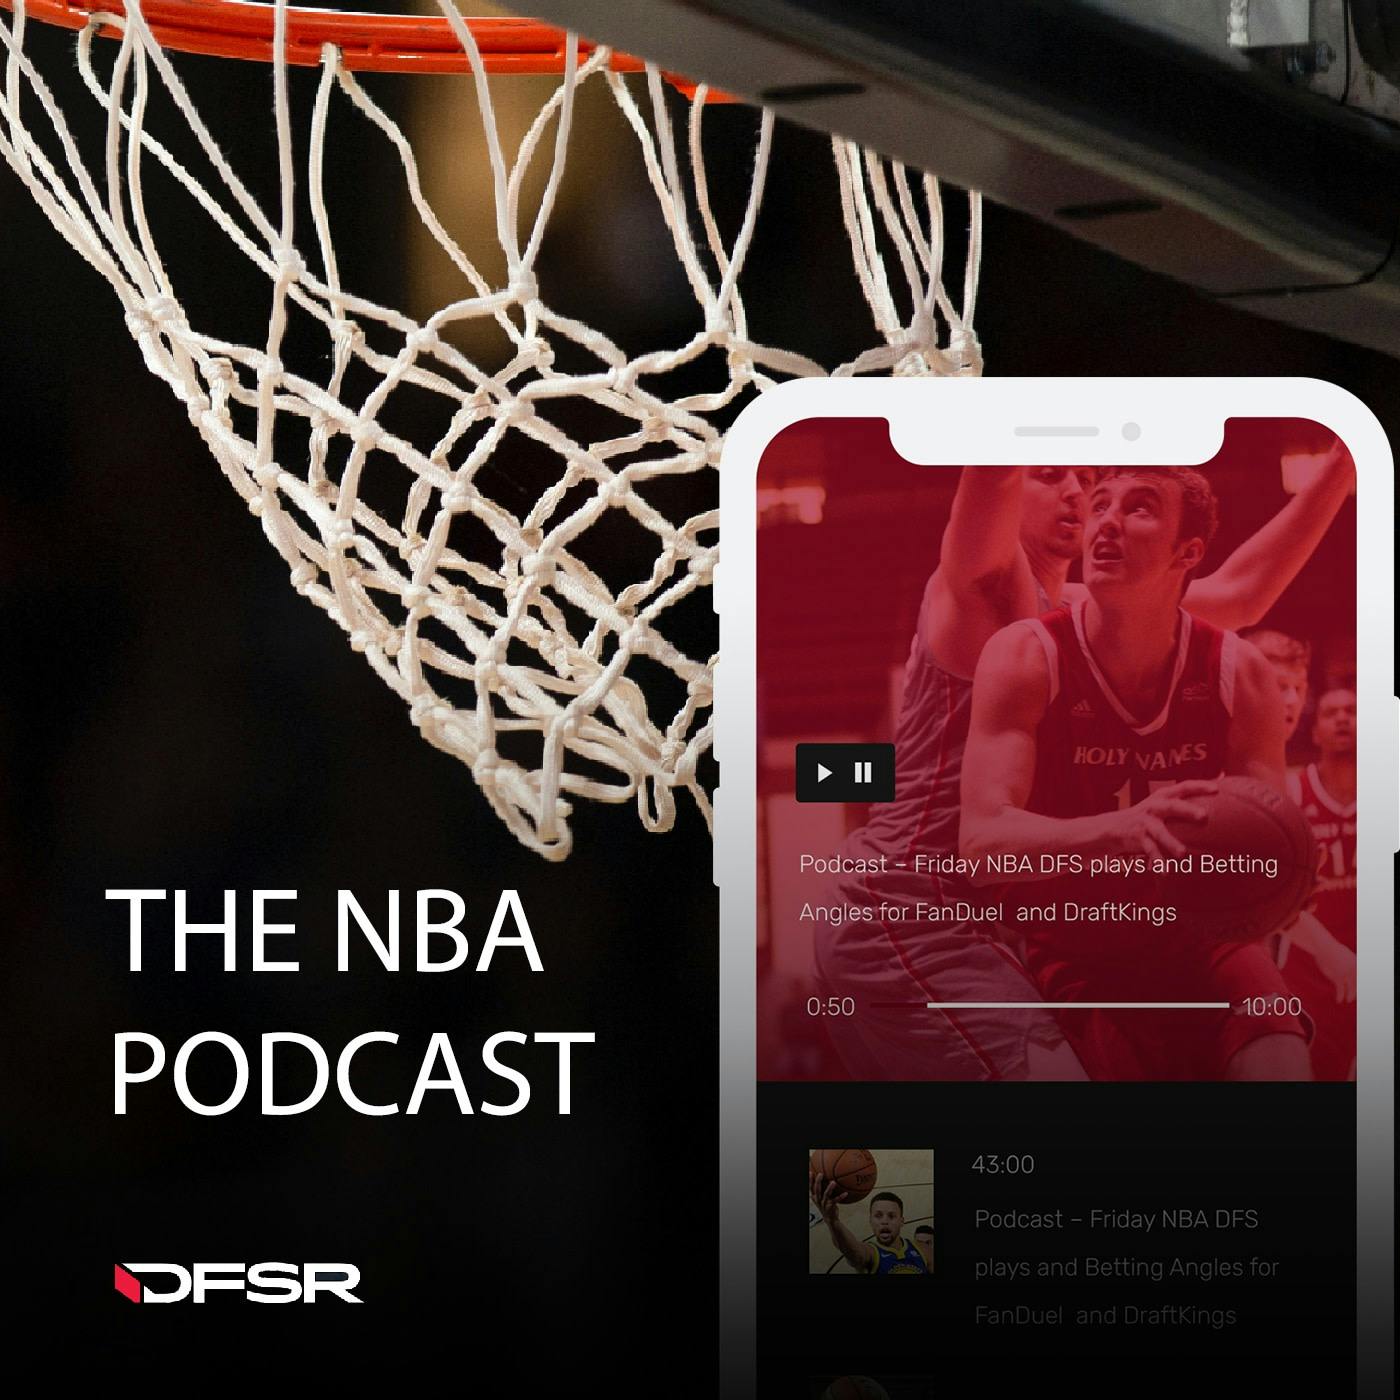 DFS NBA Podcast for Friday 4/6/18 - FanDuel and DraftKings